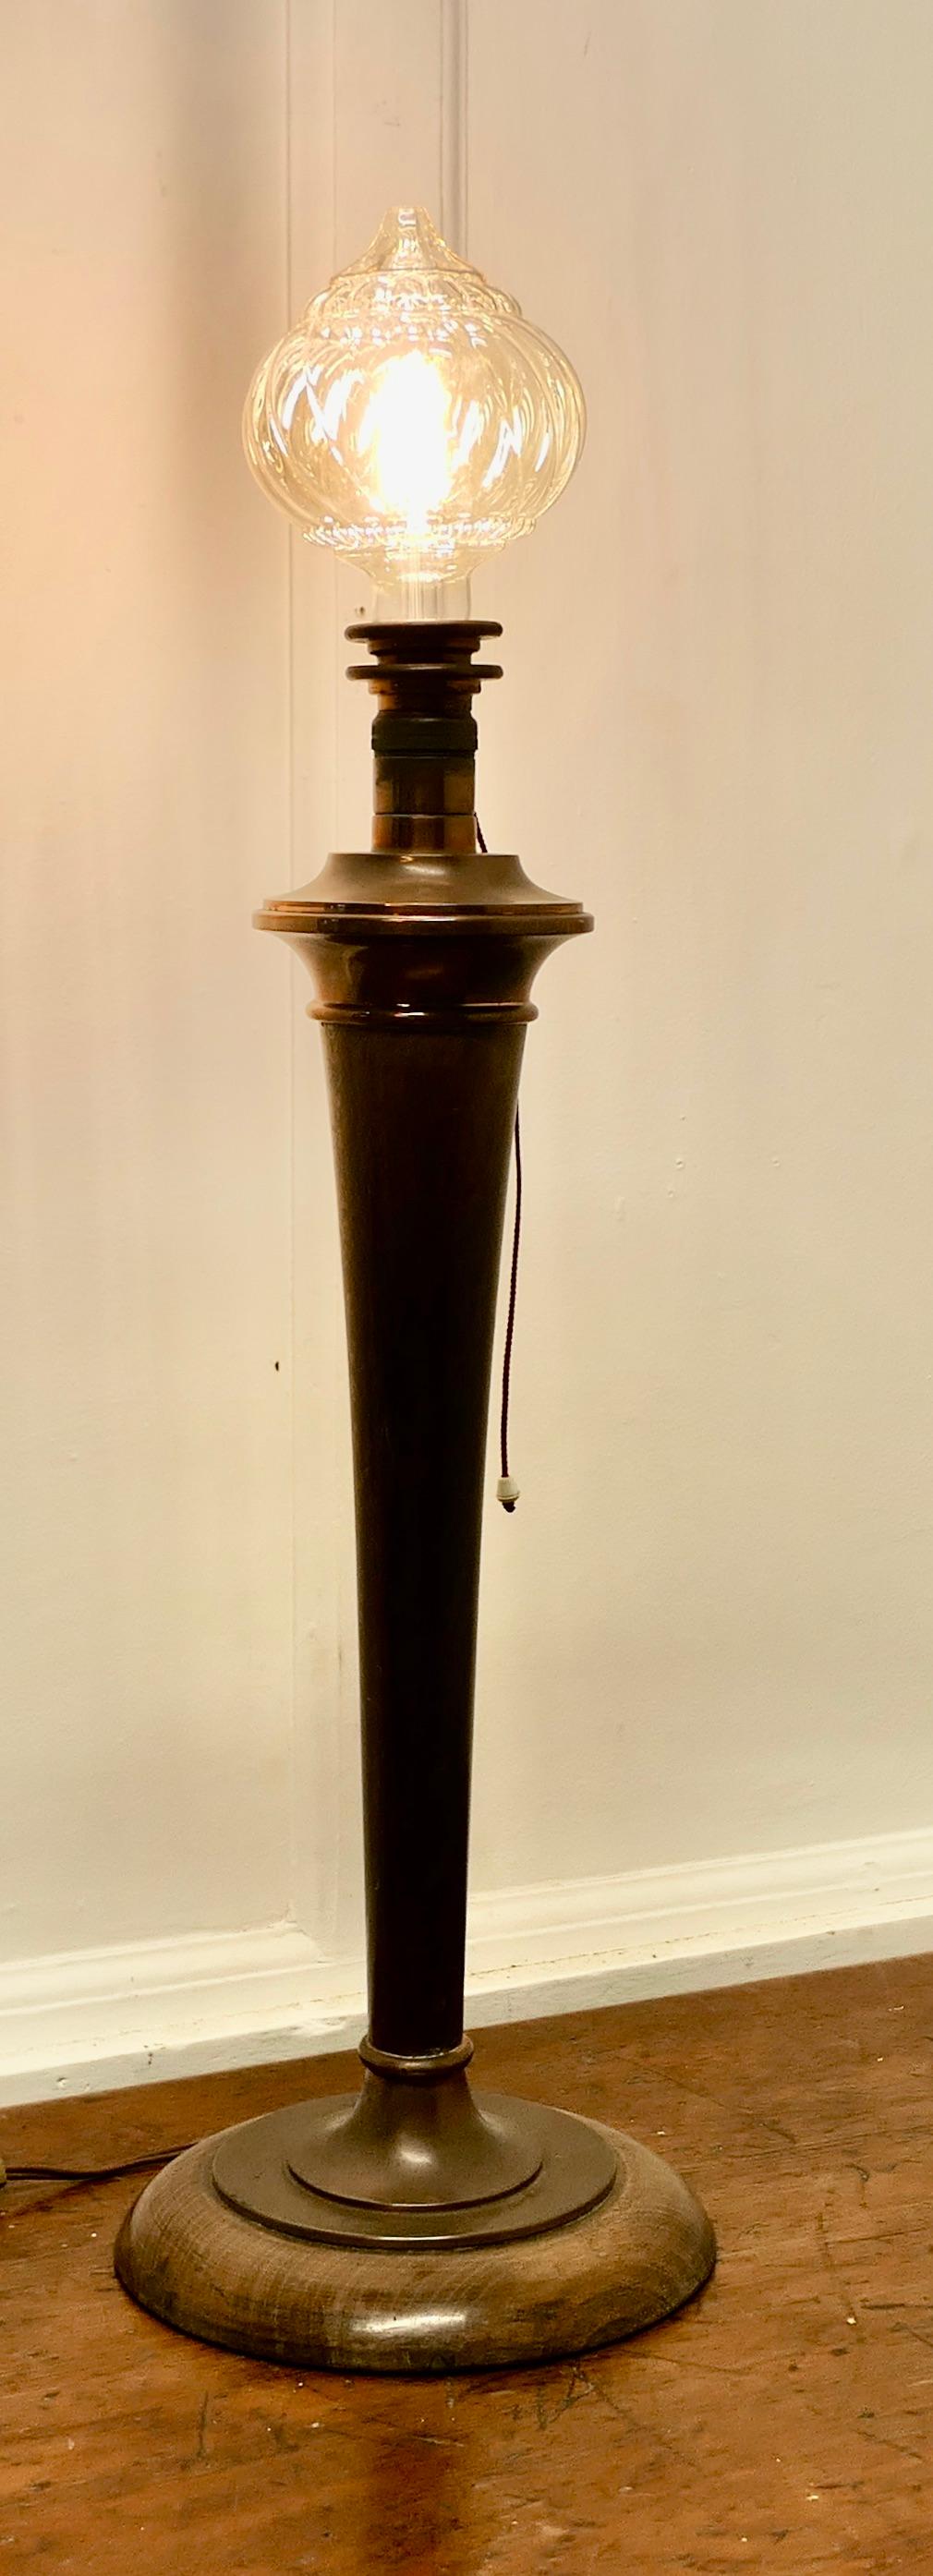 Tall Art Deco Walnut and Copper Table Lamp

This is  a very attractive Table Lamp from the 1920s brought right up to date with a modern Big Globe Crystal Light bulb which is included with the lamp, the wiring is fairly new
The Lamp is 30” tall, 9”